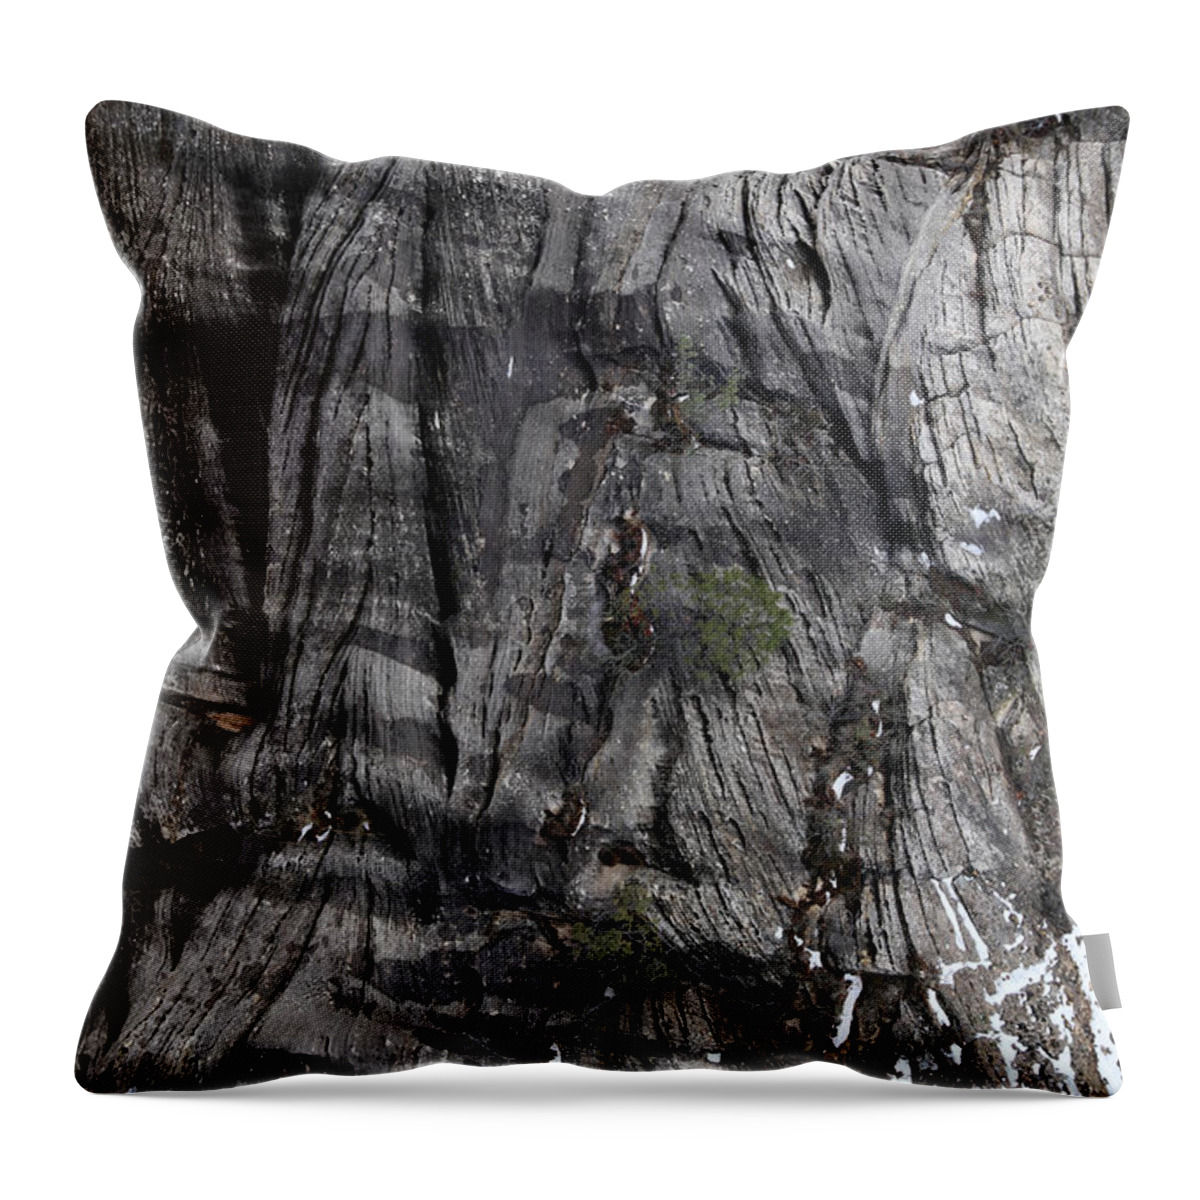 Arizona Throw Pillow featuring the photograph Sandstone Erosion Walnut Canyon by Mary Bedy